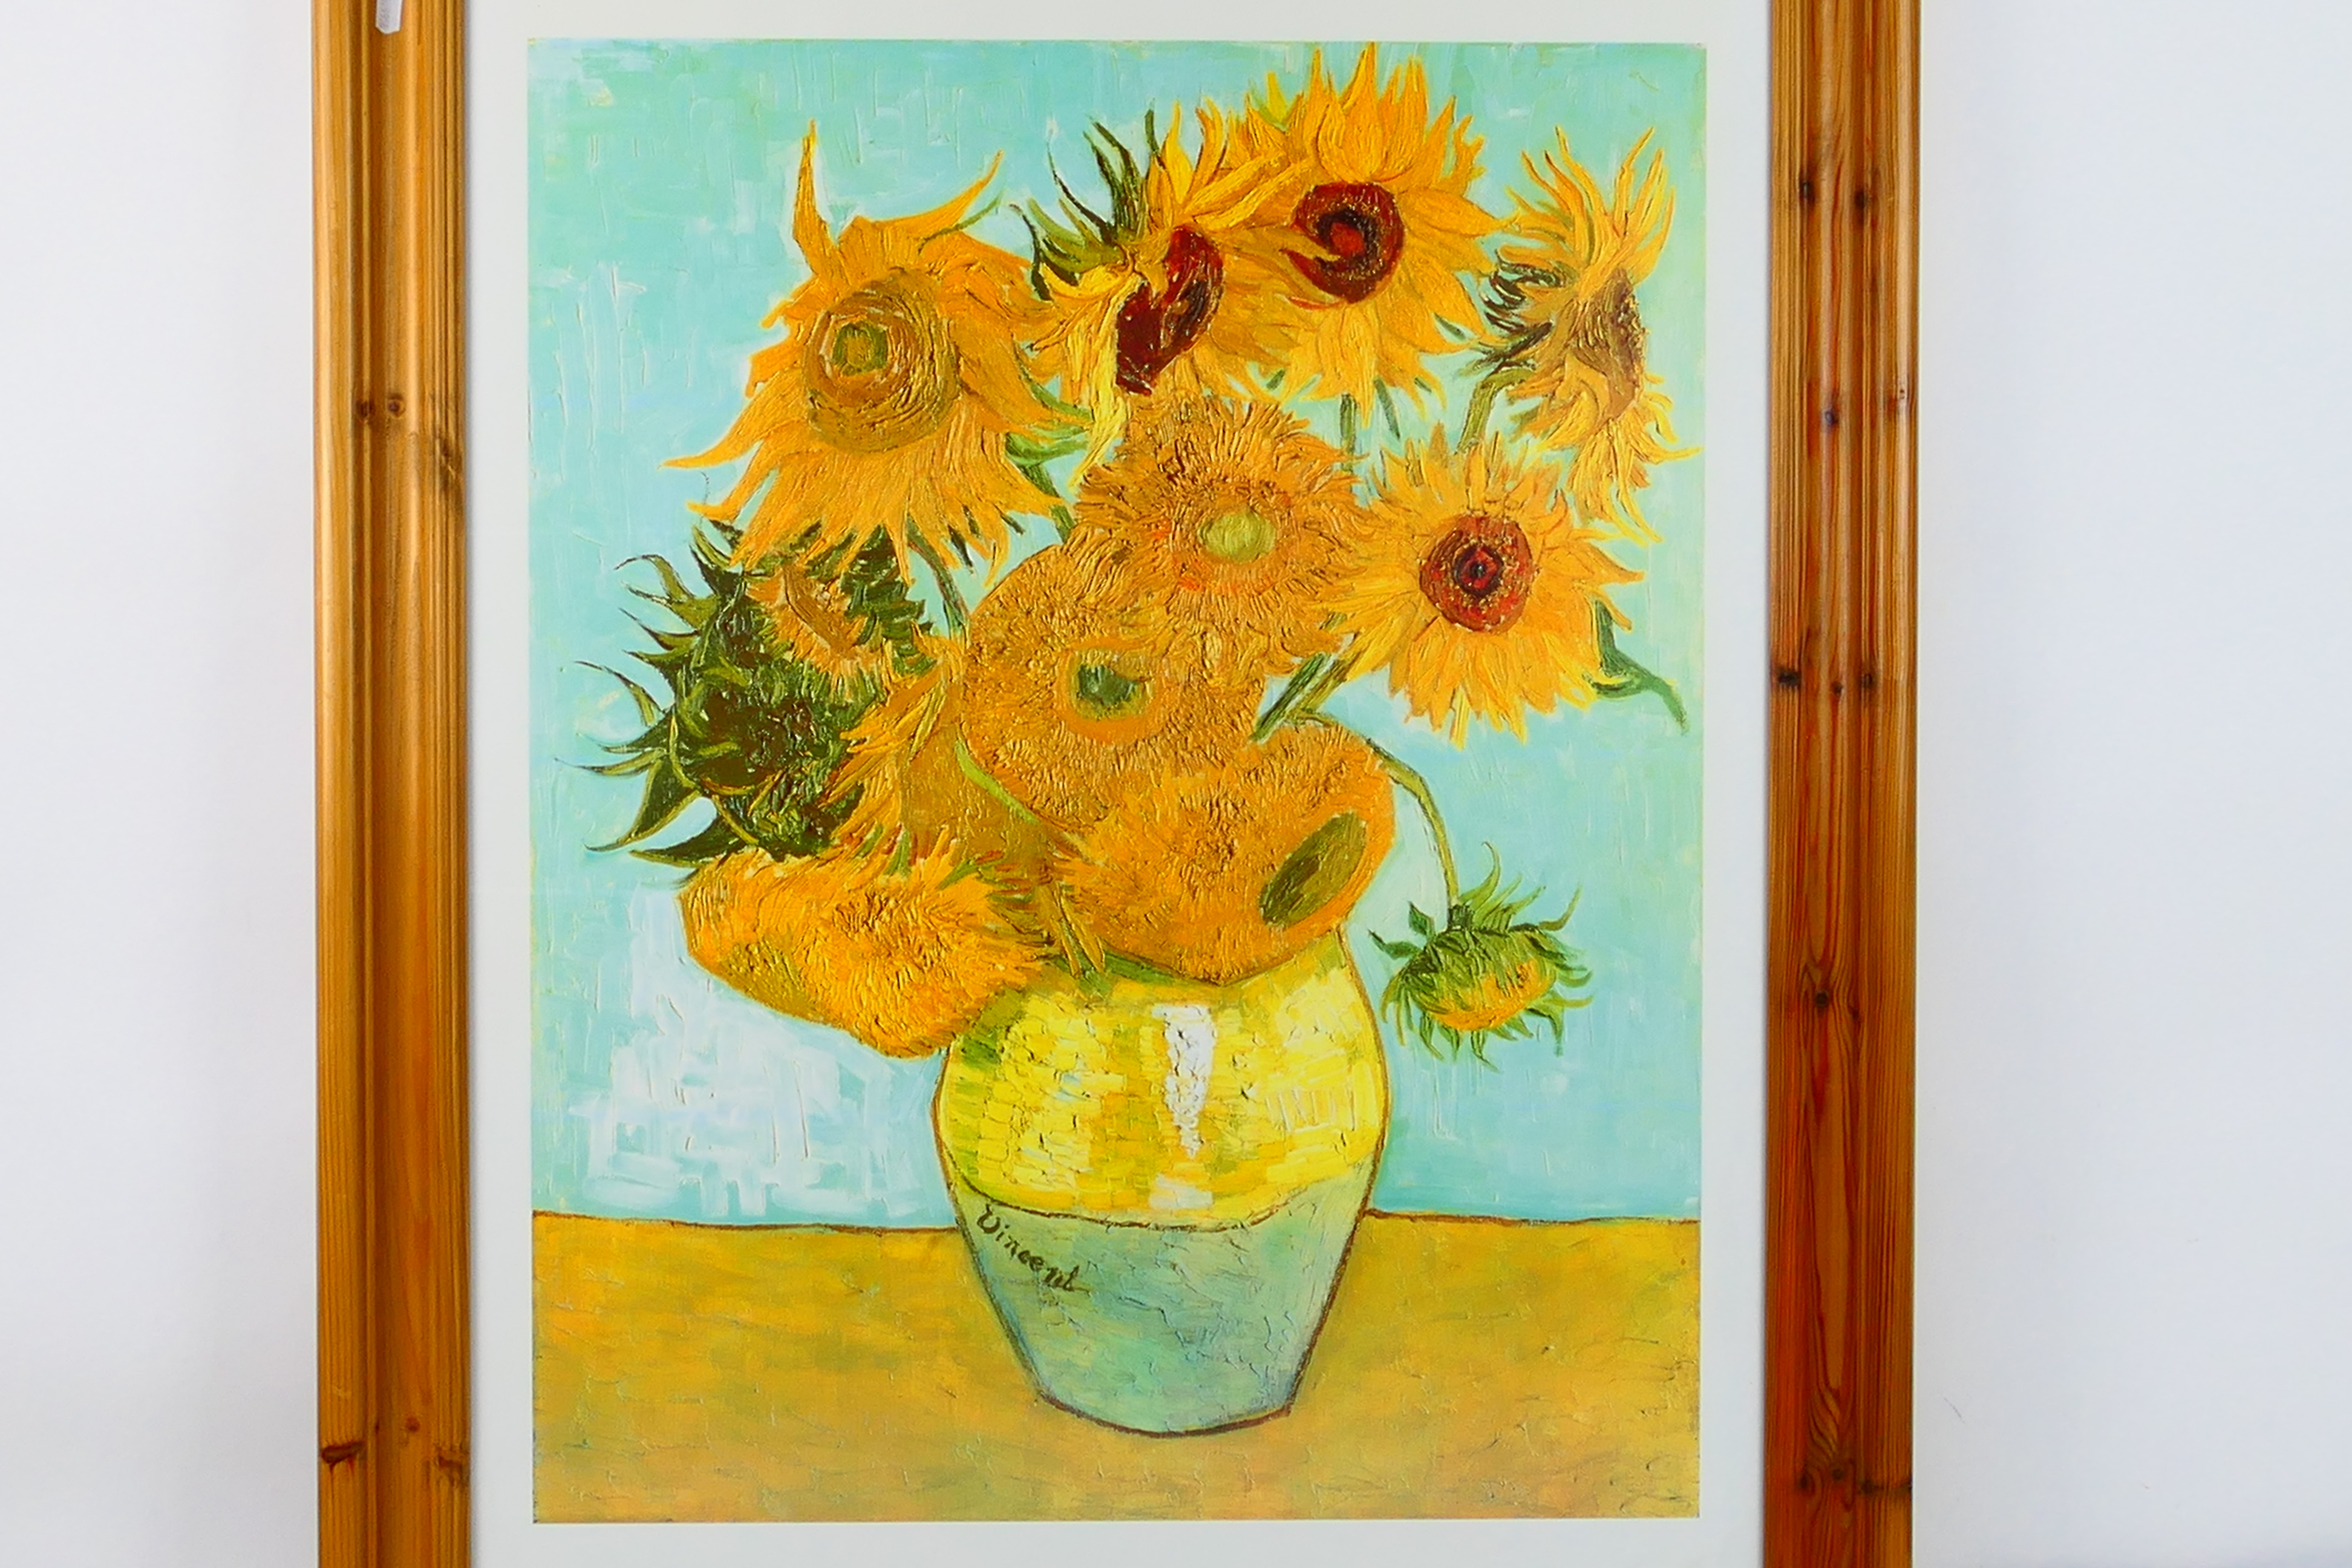 A framed print after Vincent Van Gogh, Sunflowers, approximately 67 cm x 53 cm image size. - Image 2 of 2